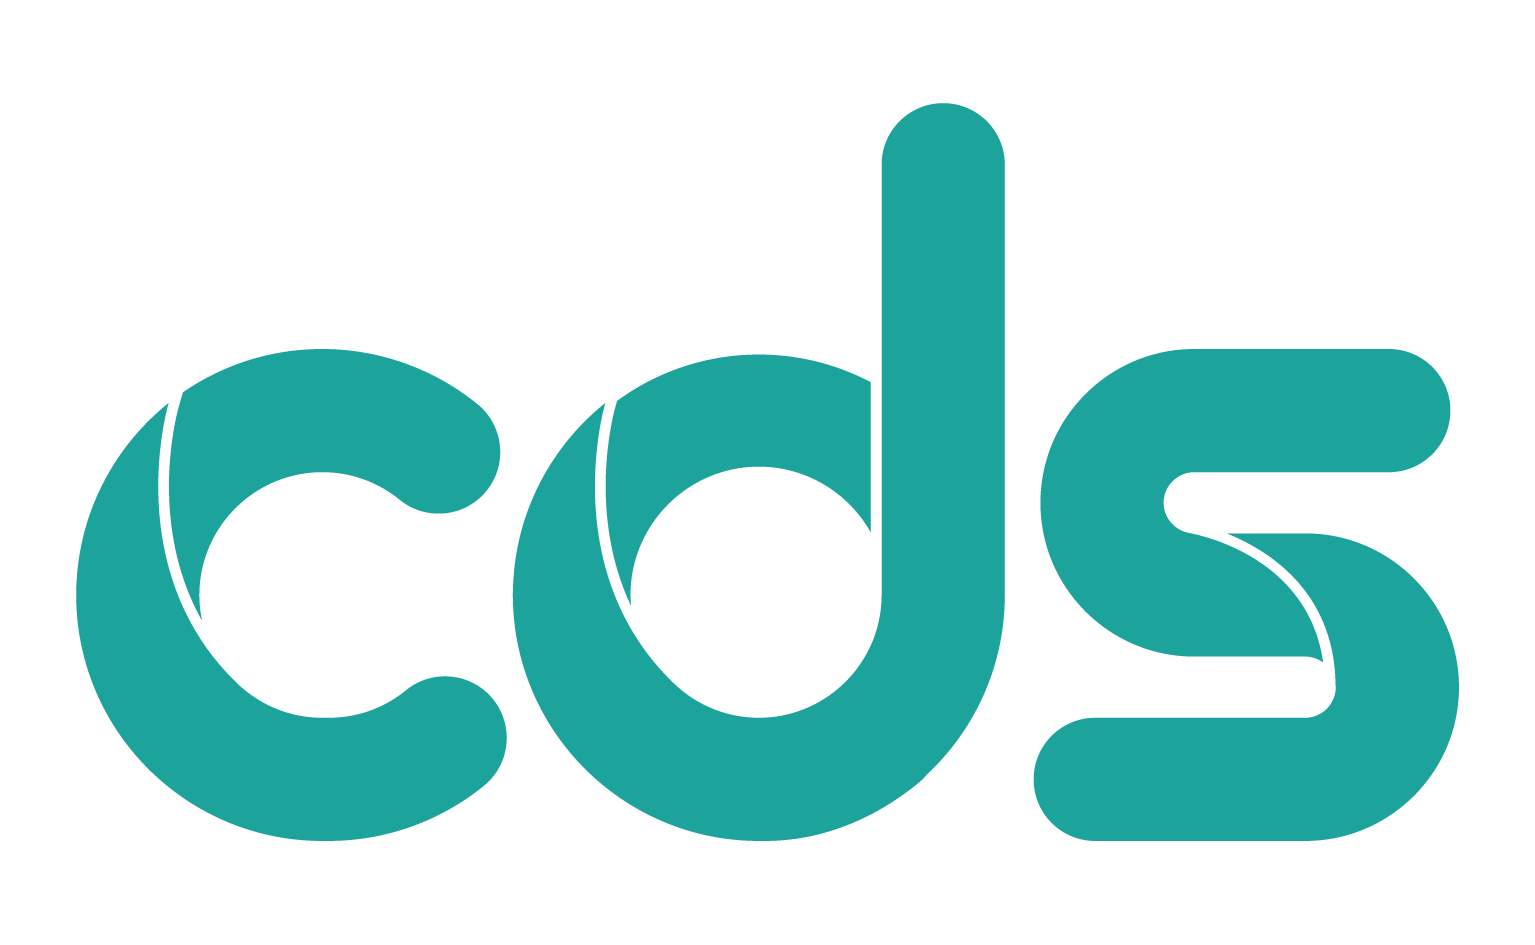 CDS: We simplify complexity